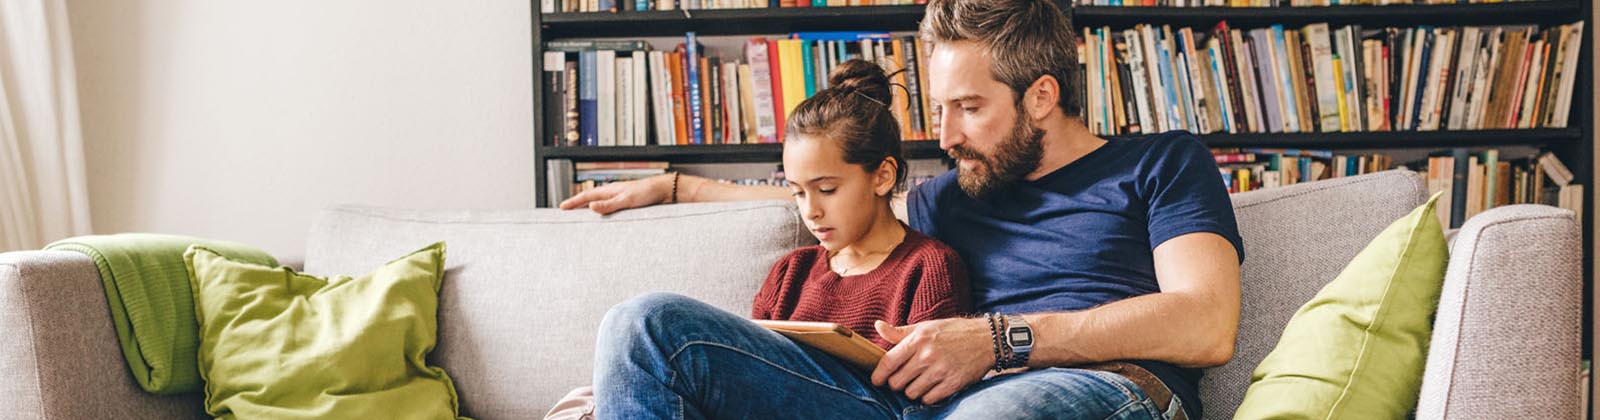 father and daughter reading on a couch together